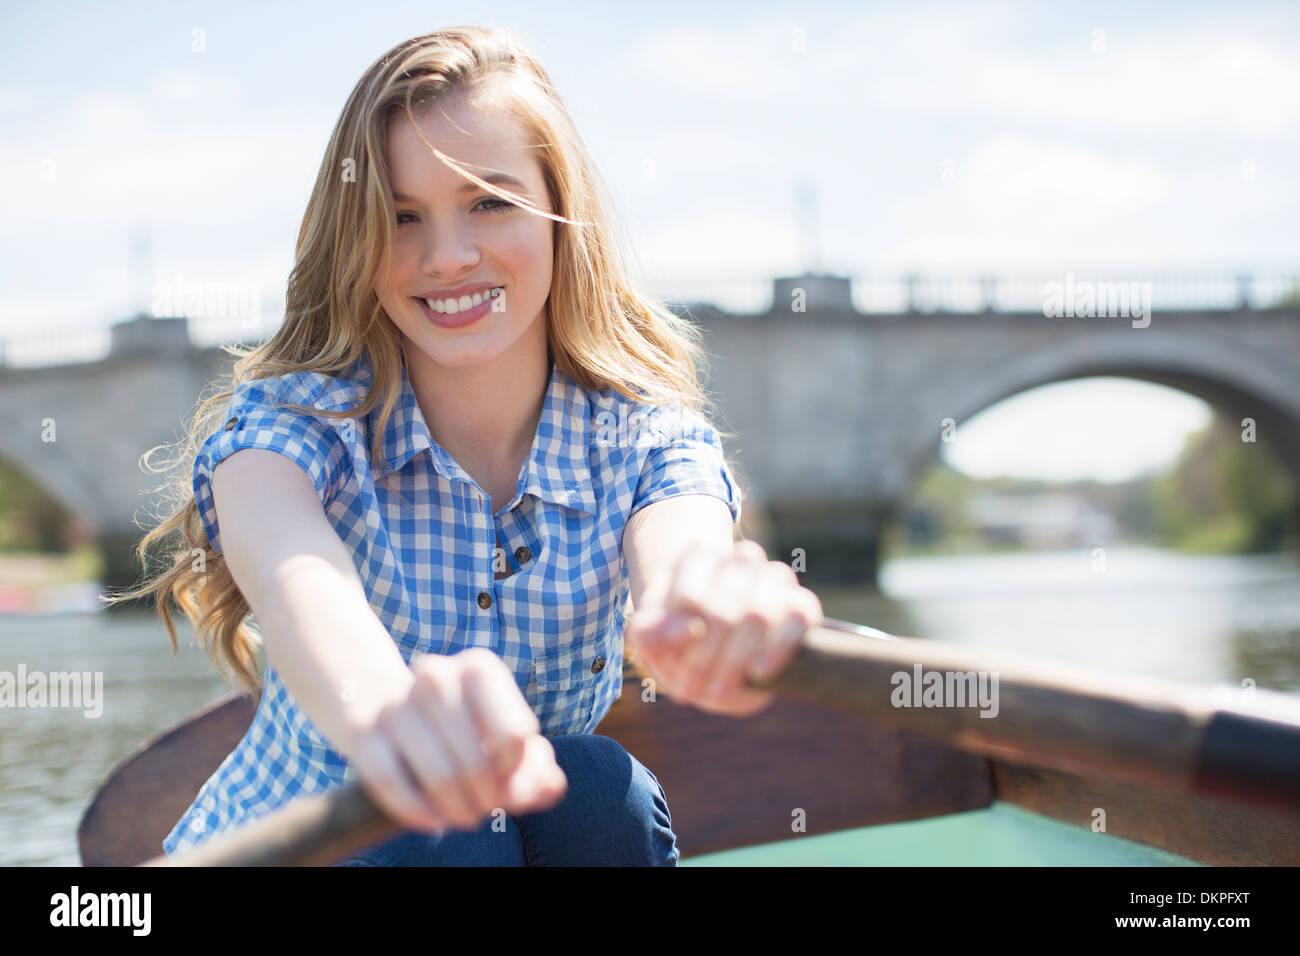 Woman rowing boat on river Stock Photo